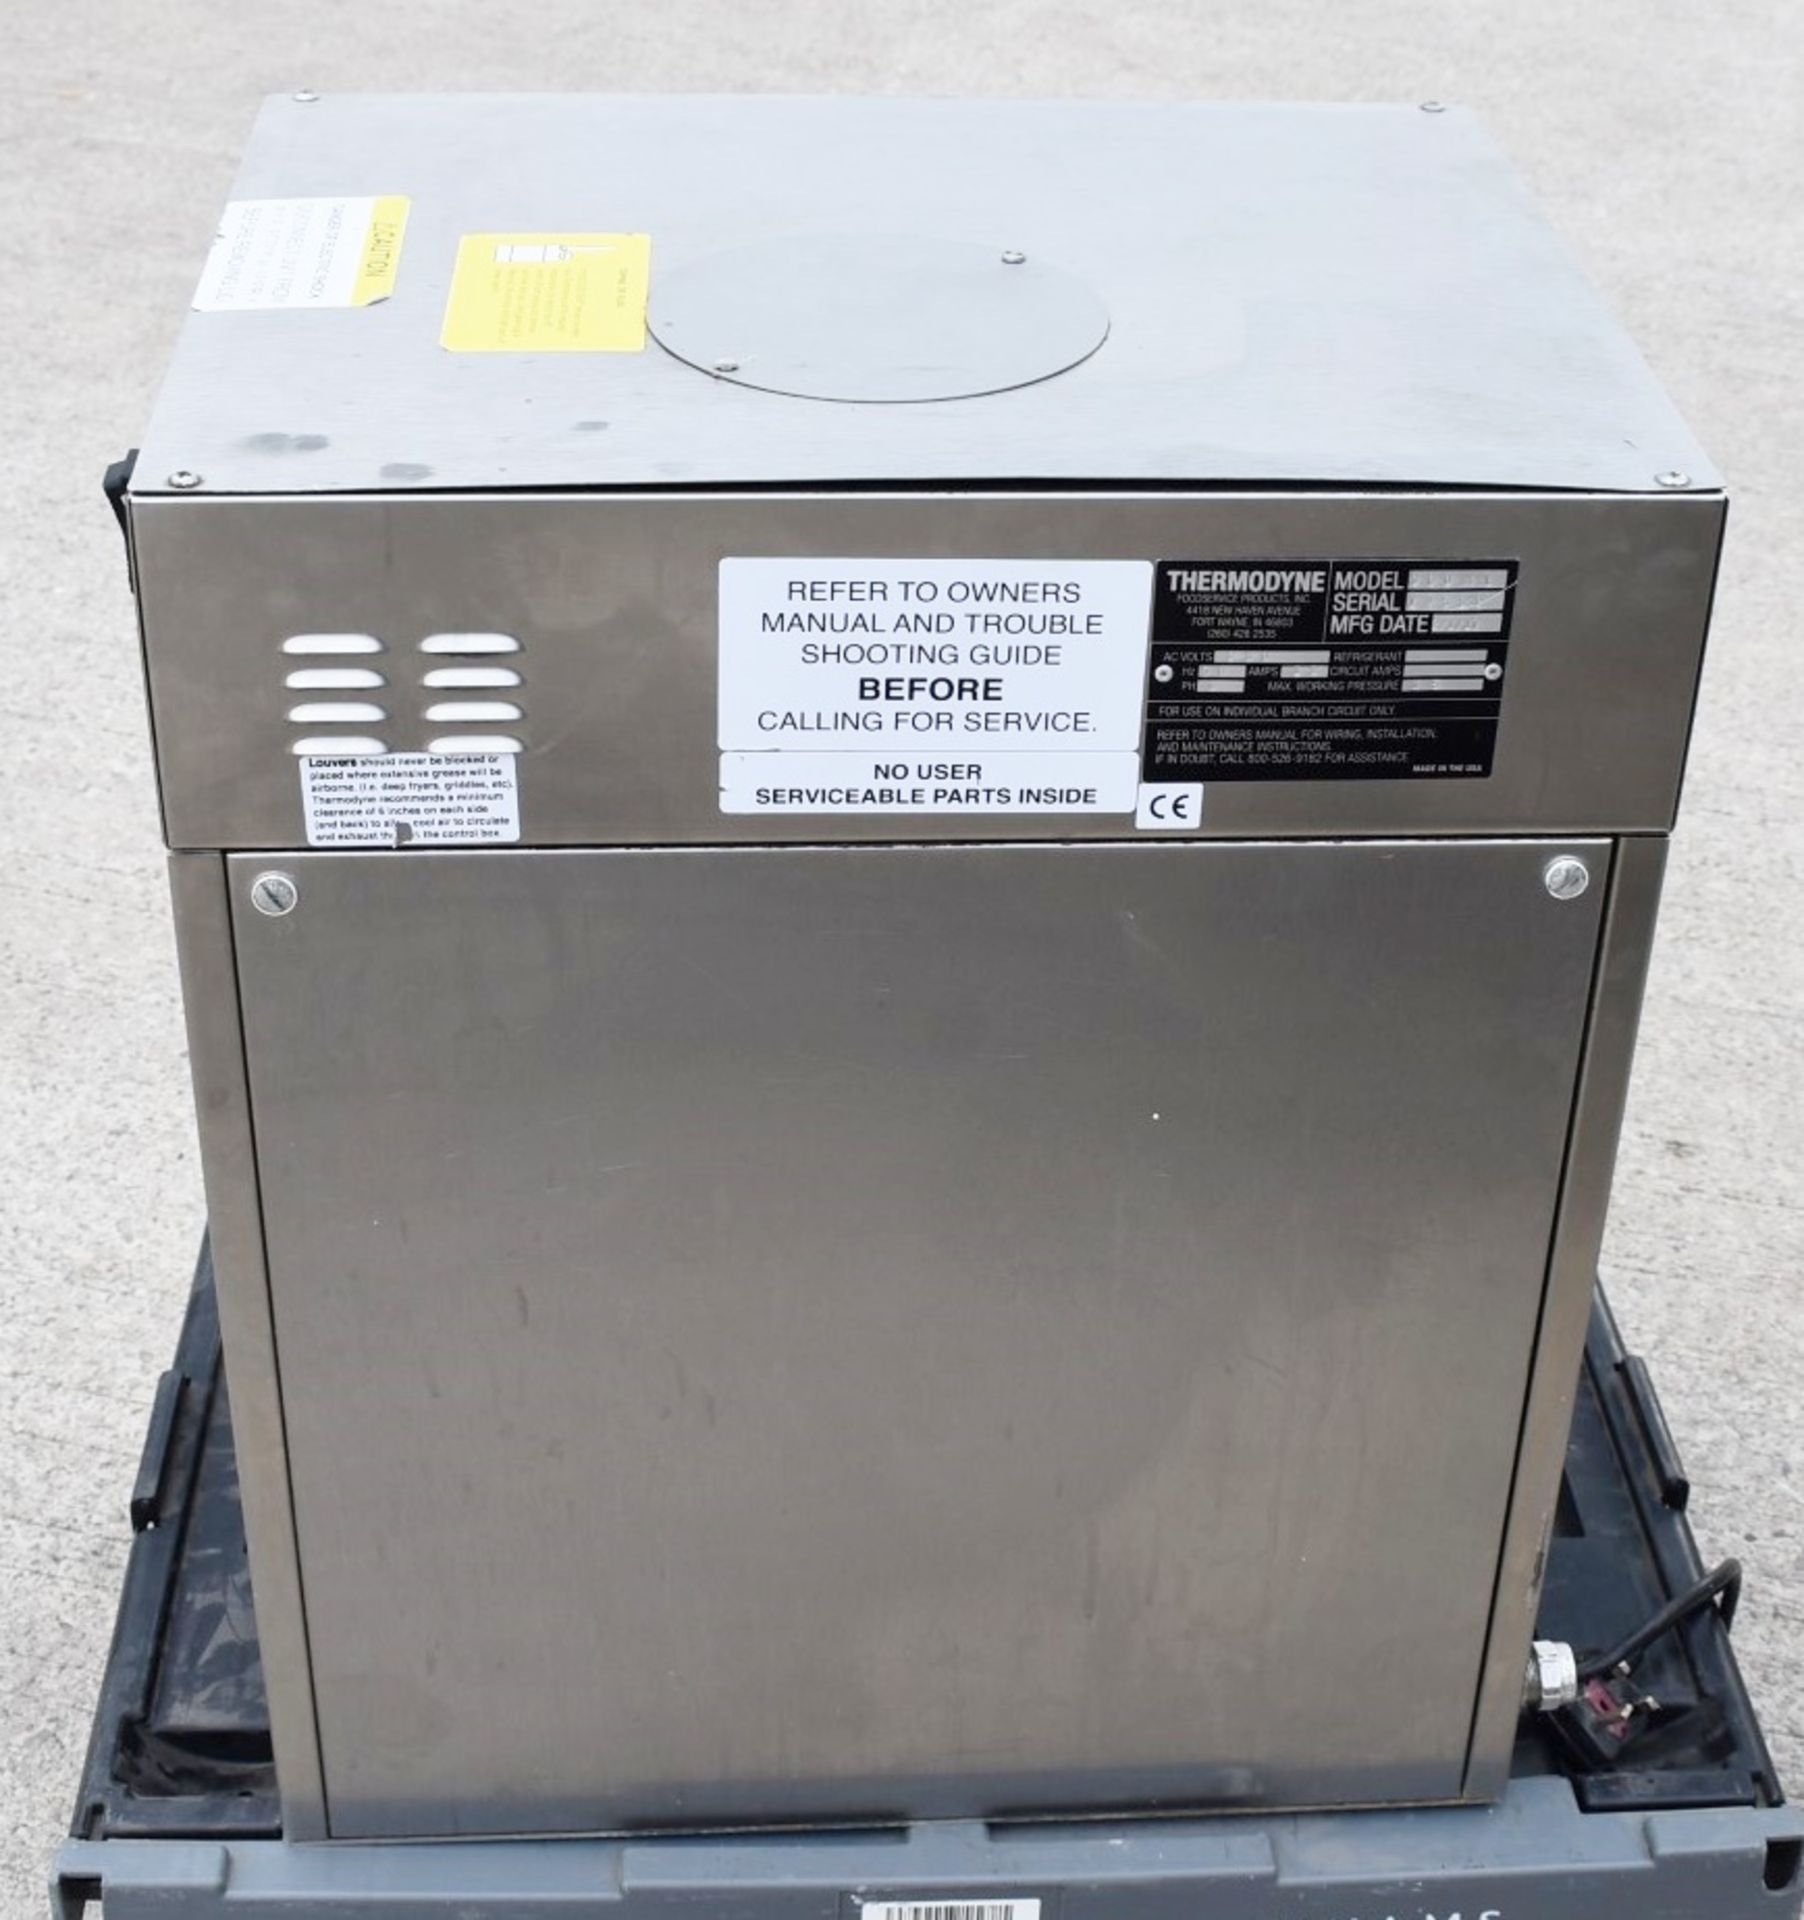 1 x Thermodyne 300 Cook and Hold Food Warming Unit - Image 6 of 11